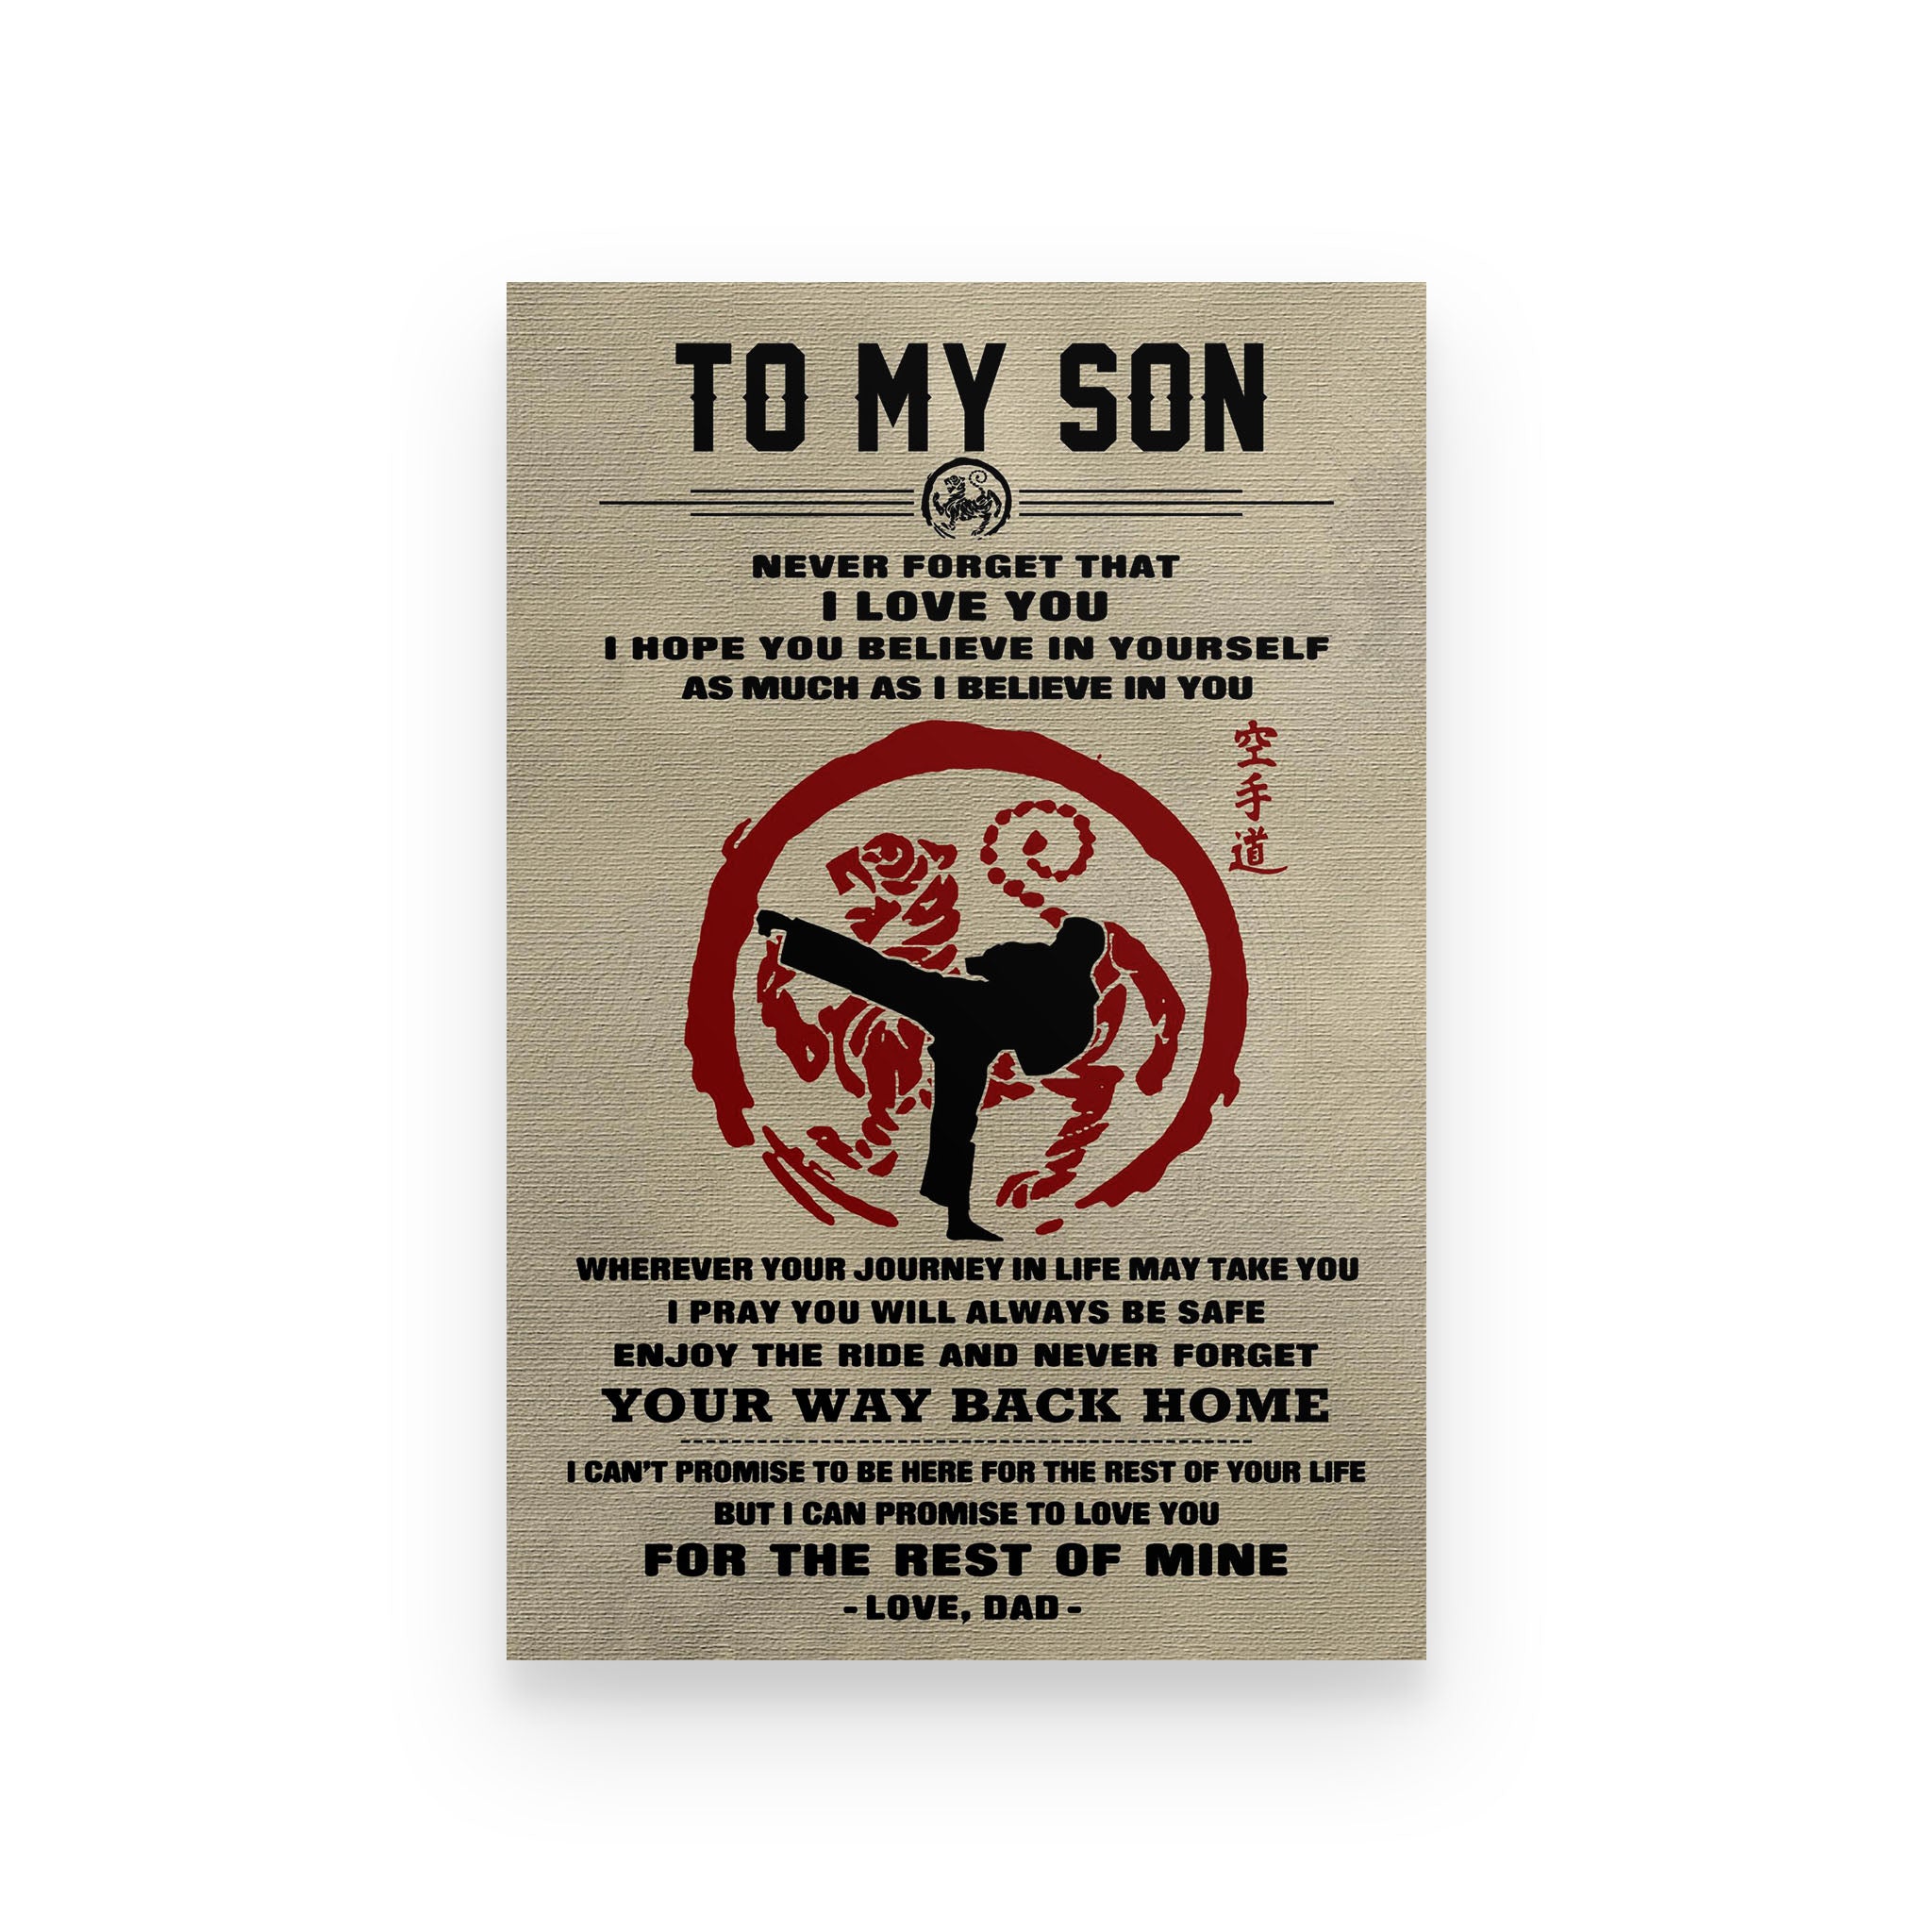 Aikido poster dad to son i hope you believe in yourself as much as i believe in you